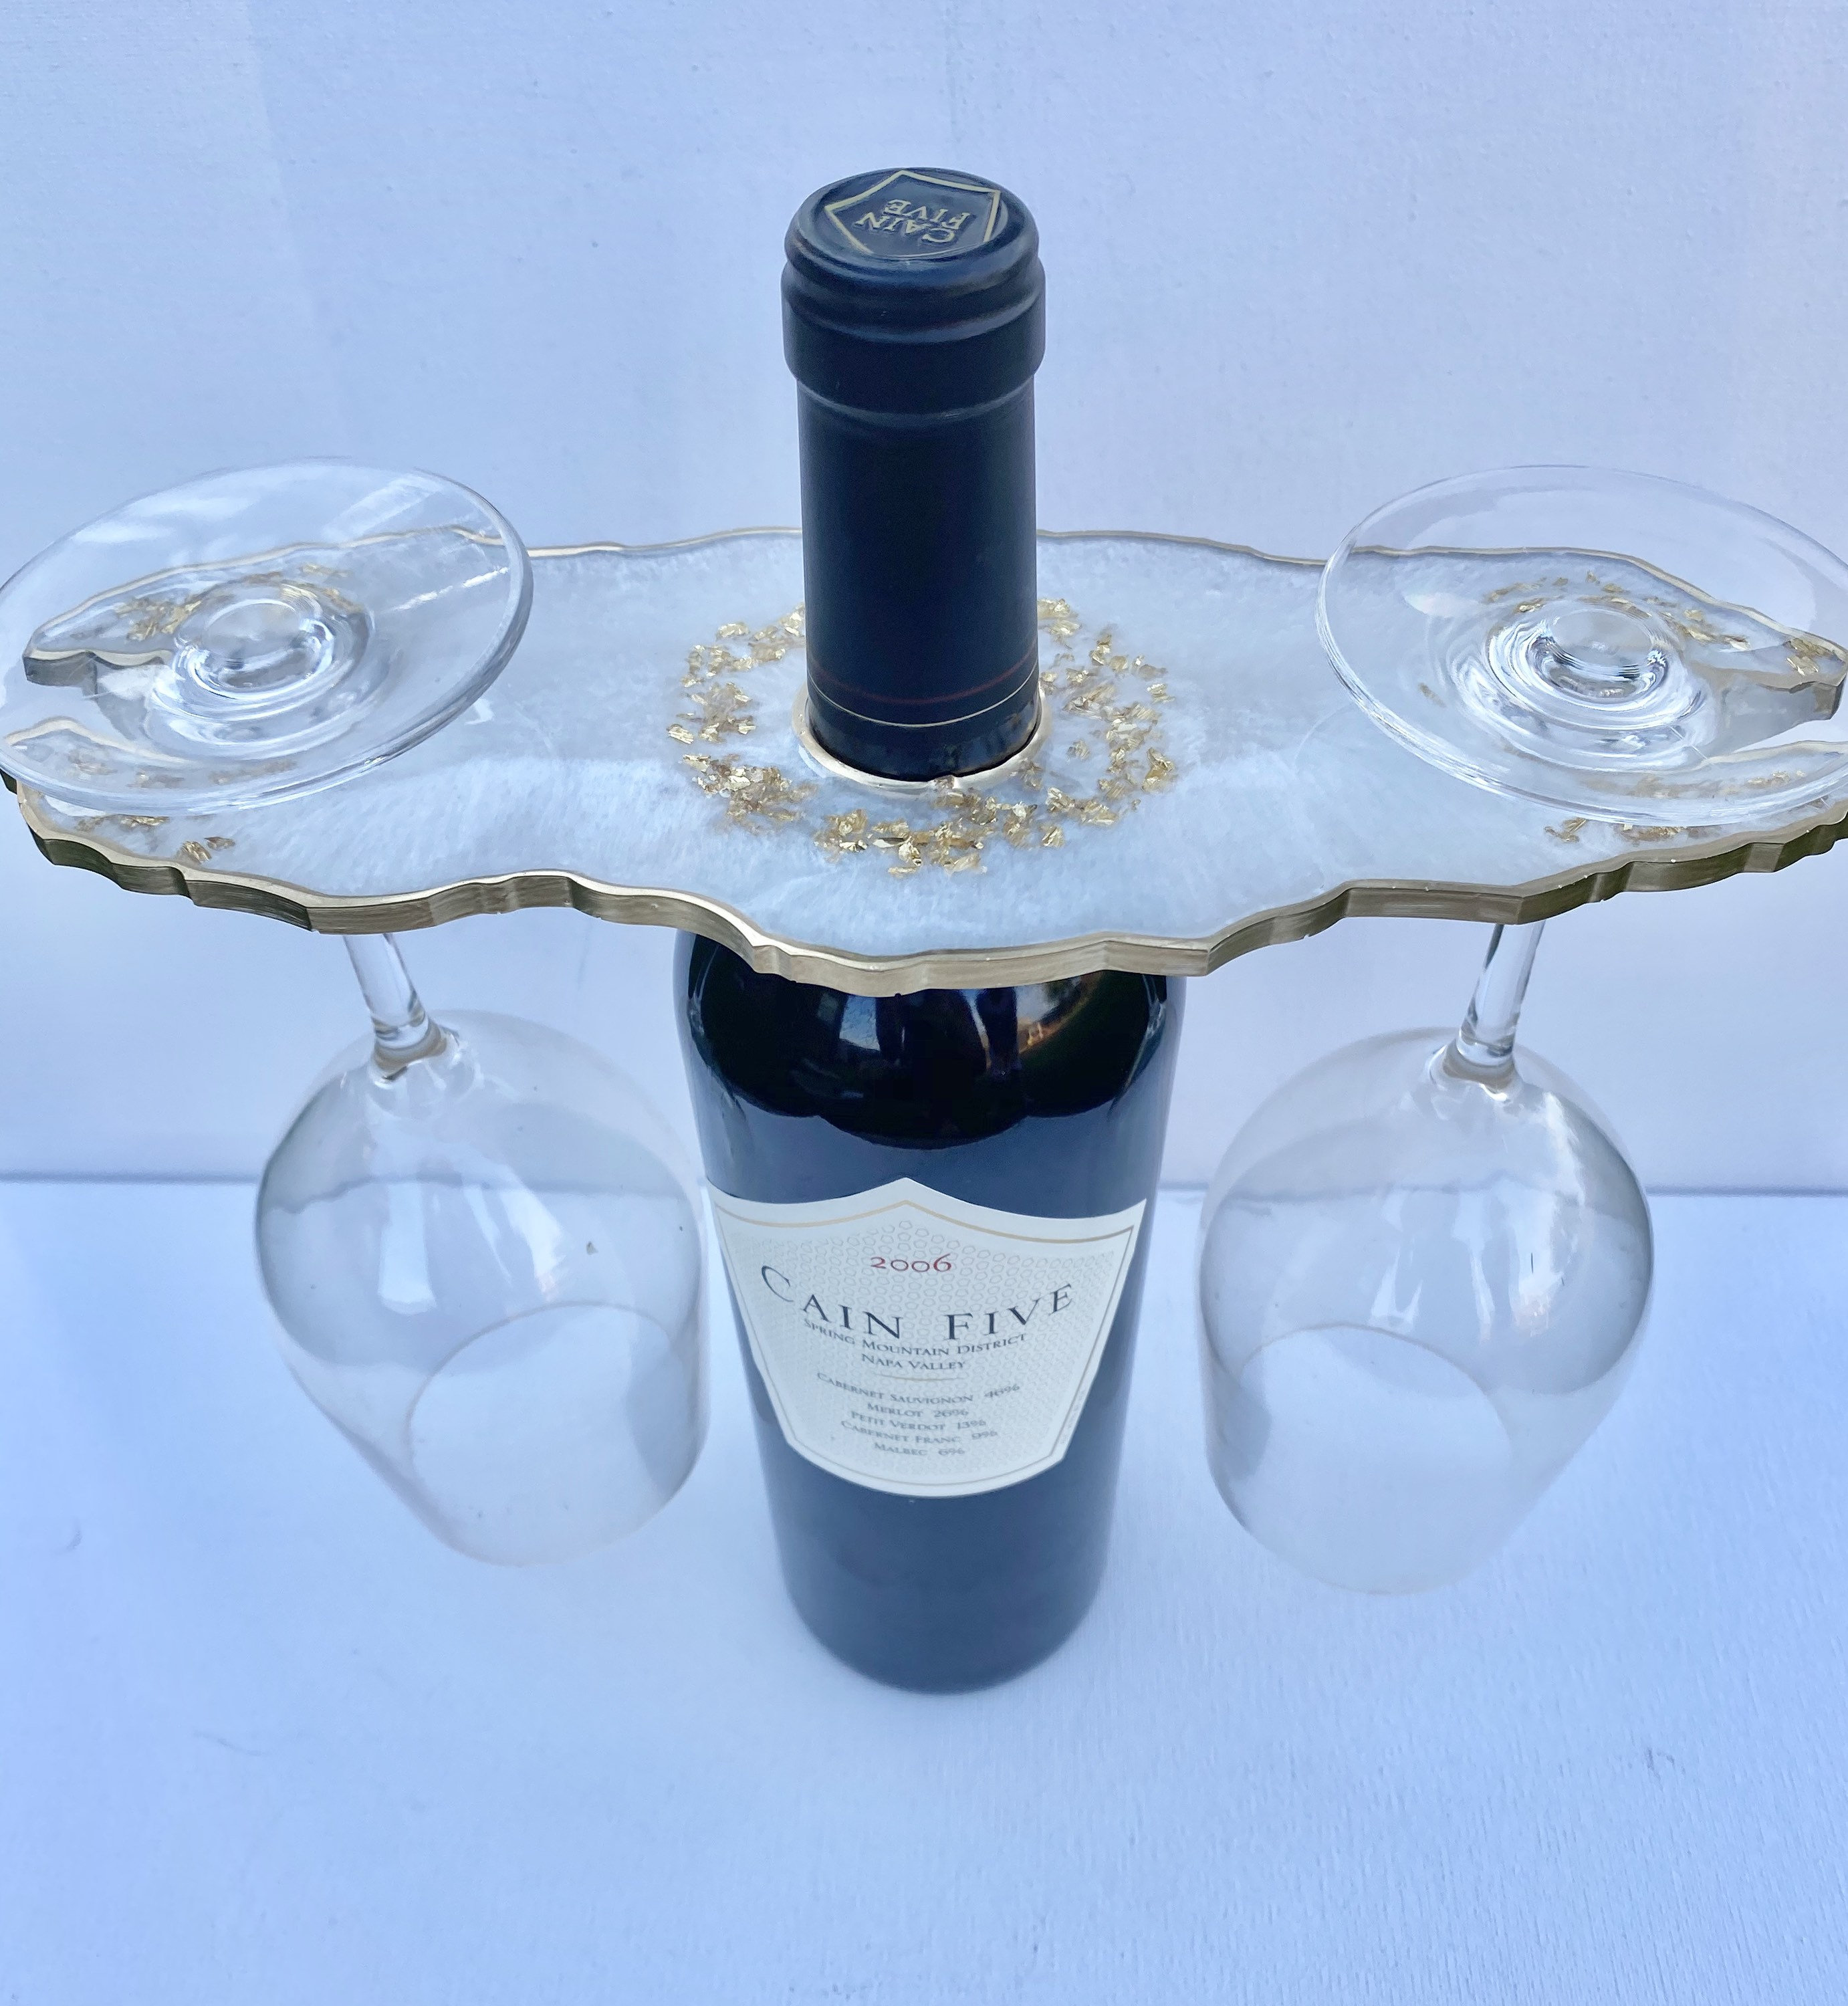 Set of 2 Michelle Butler Jeweled Wine Glasses with Cross